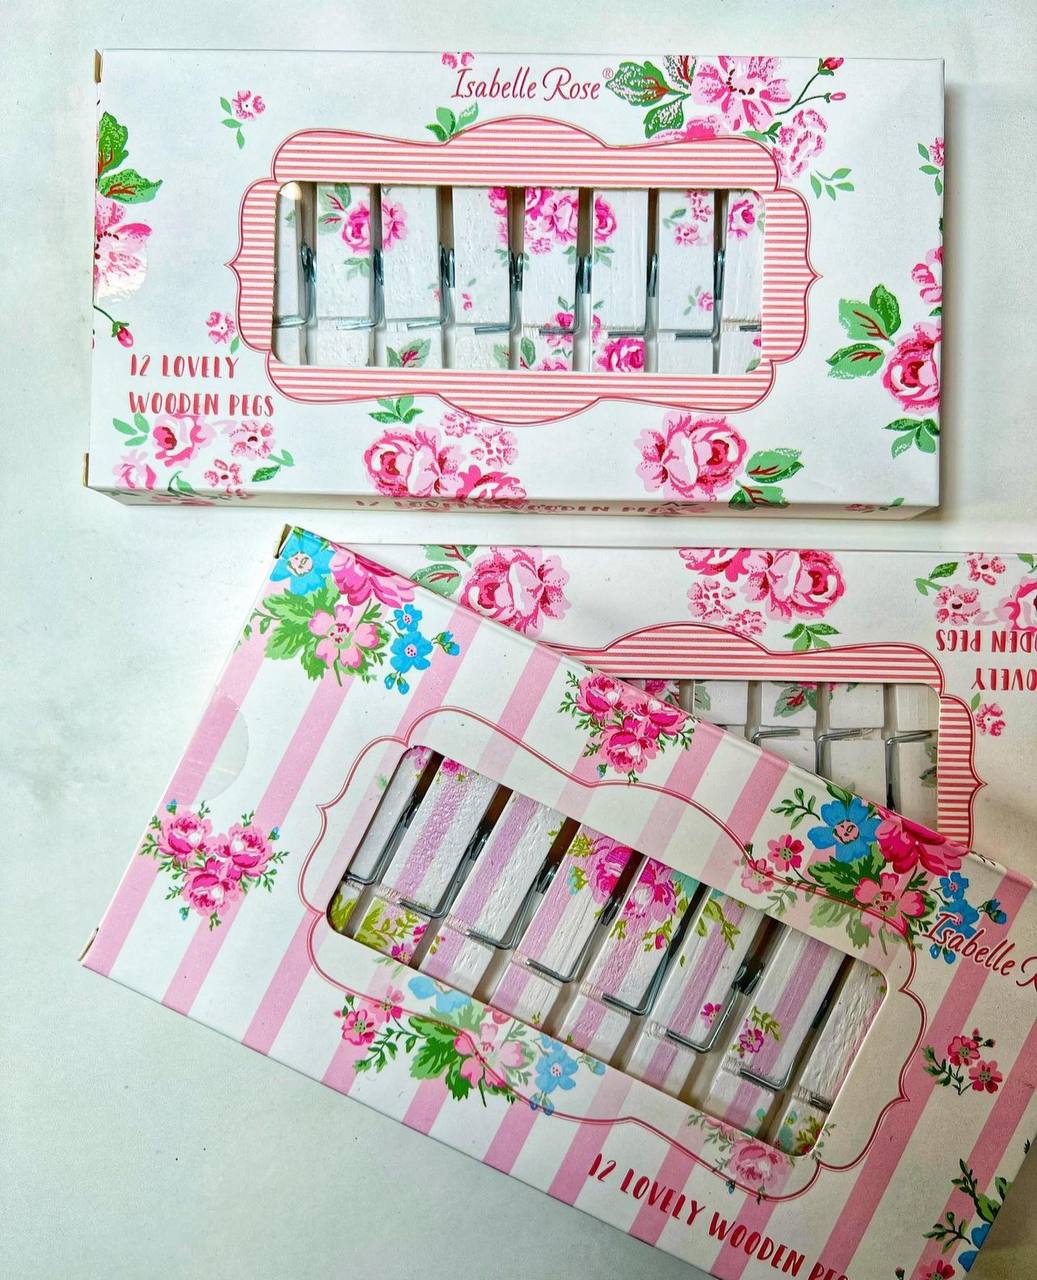 Wooden Pegs Set Lucy Rose 12 Pcs in Box Isabelle Rose